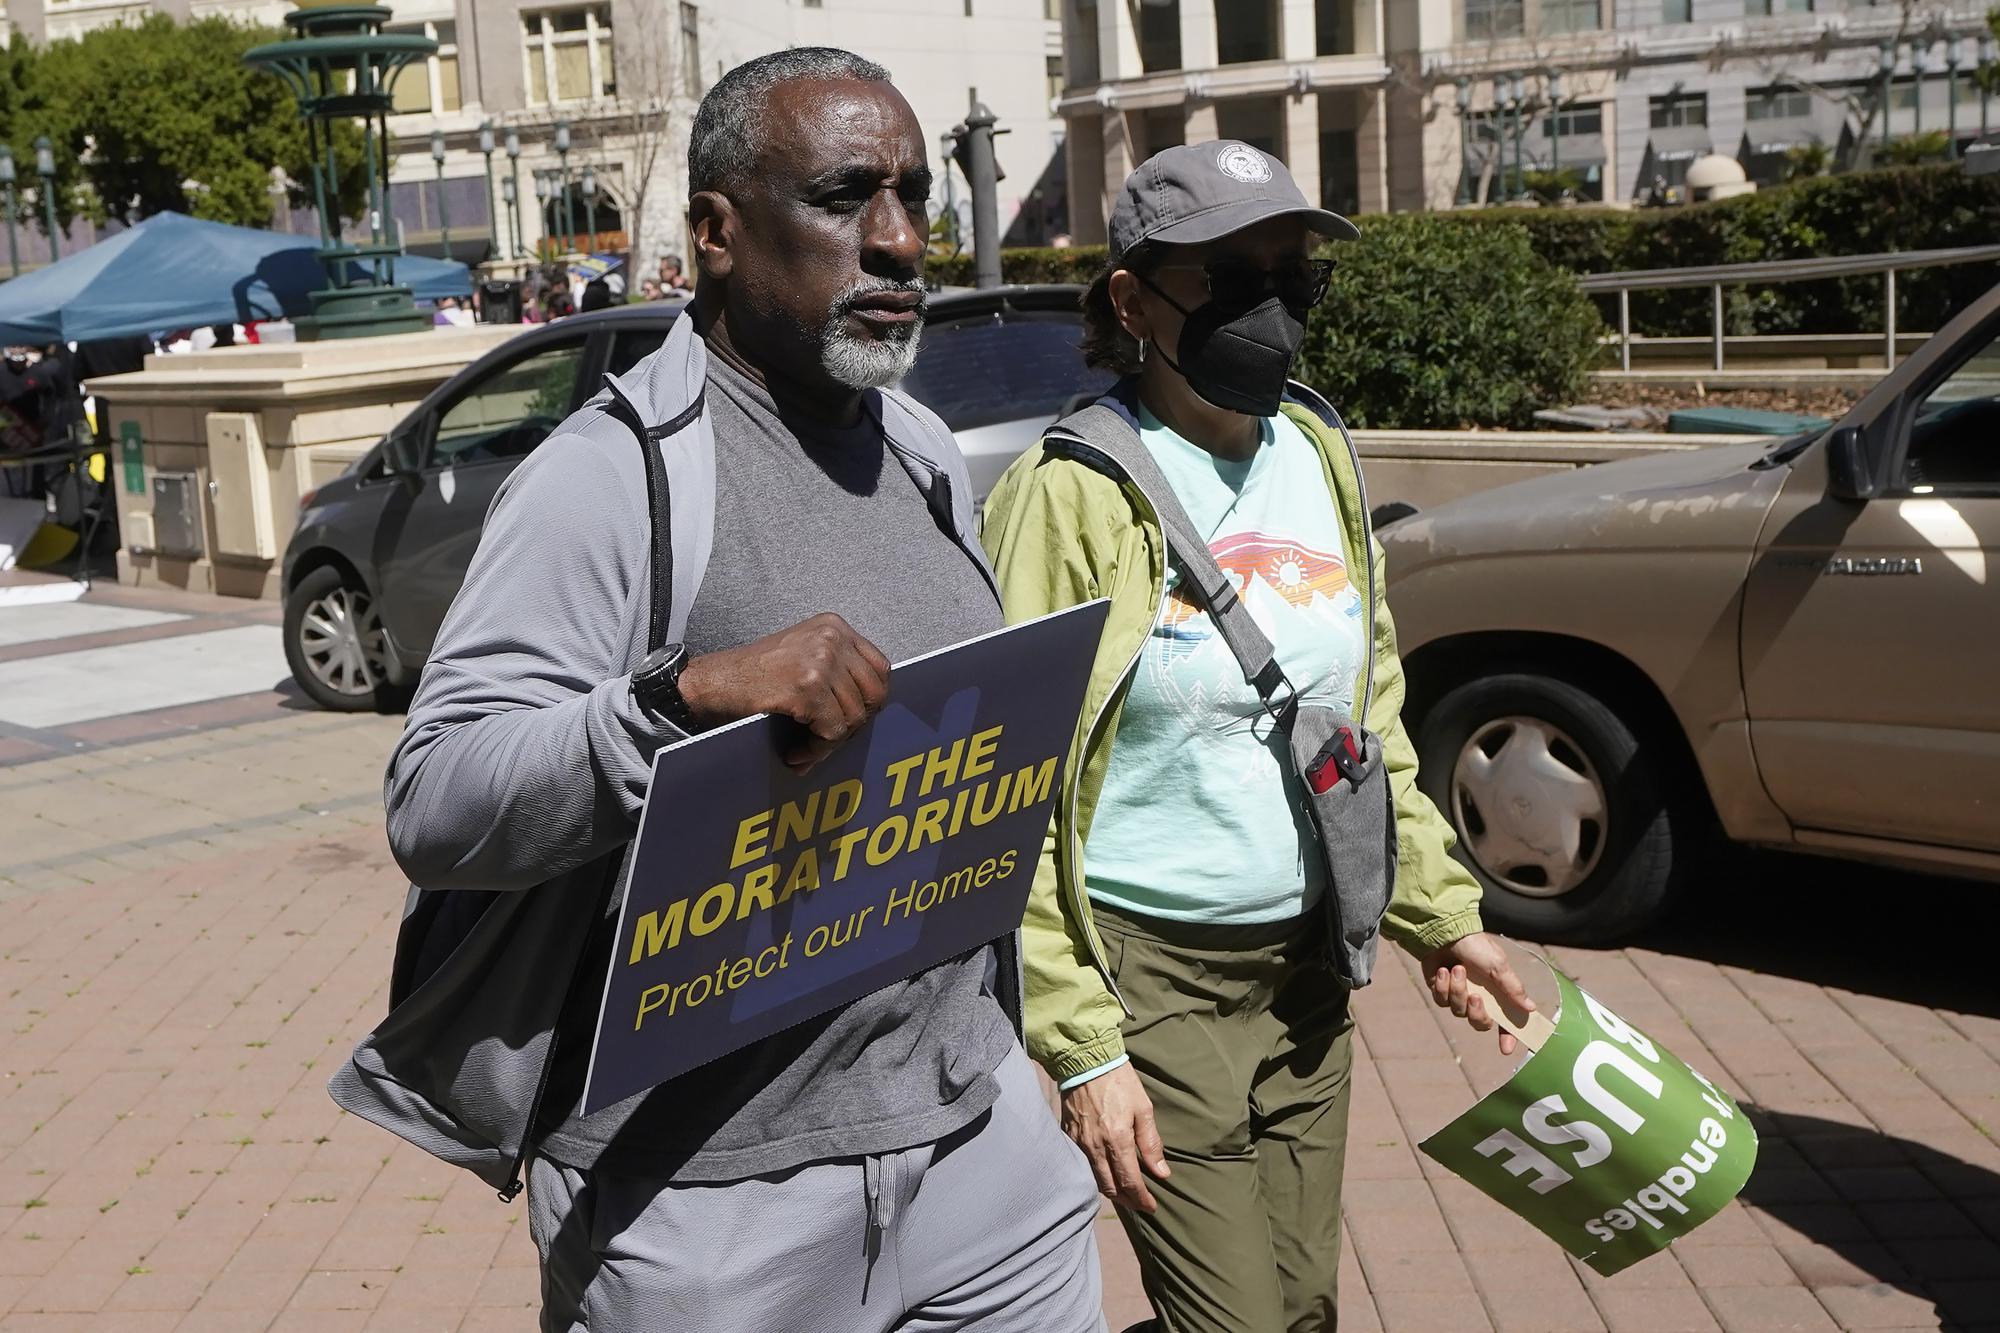 John Williams, left, walks leaves a rally calling for an end to the eviction moratorium before a special community and economic development committee by the Oakland City Council at City Hall in Oakland, Calif., Tuesday, April 11, 2023. Some landlords have gone without rental income for more than three years after Oakland, California approved an eviction moratorium in March 2020. (AP Photo/Jeff Chiu)